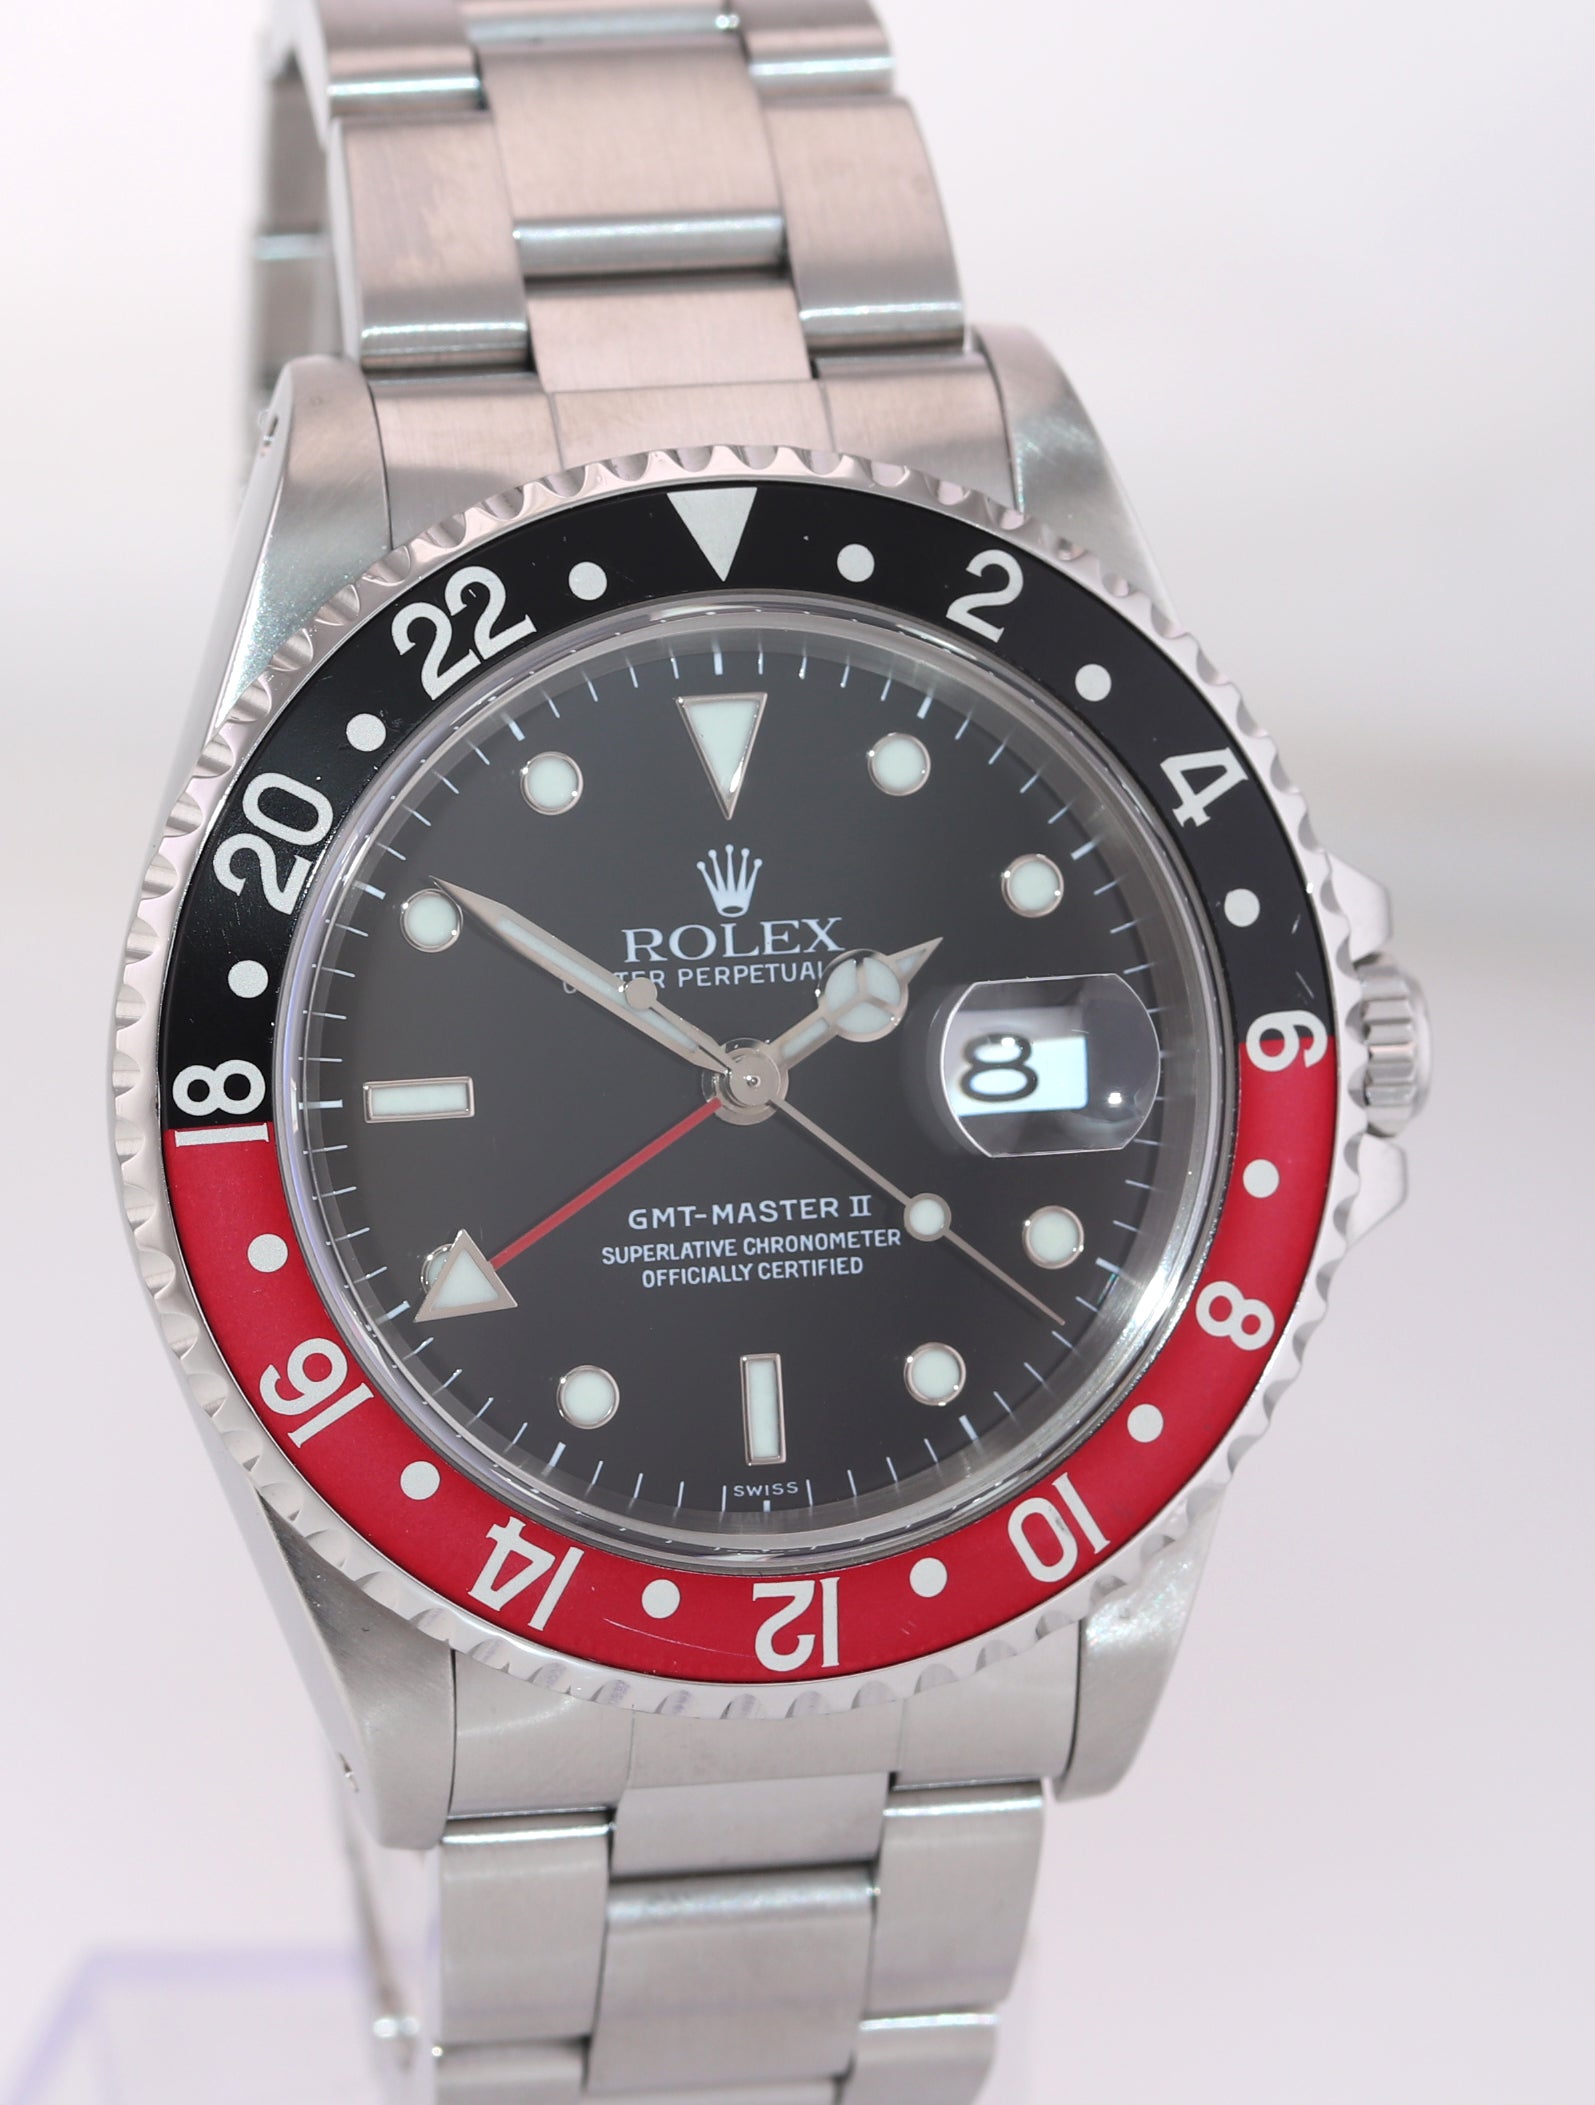 1999 PAPERS Rolex GMT-Master 2 Steel 16710 Watch Coke Red SWISS Only Dial Watch